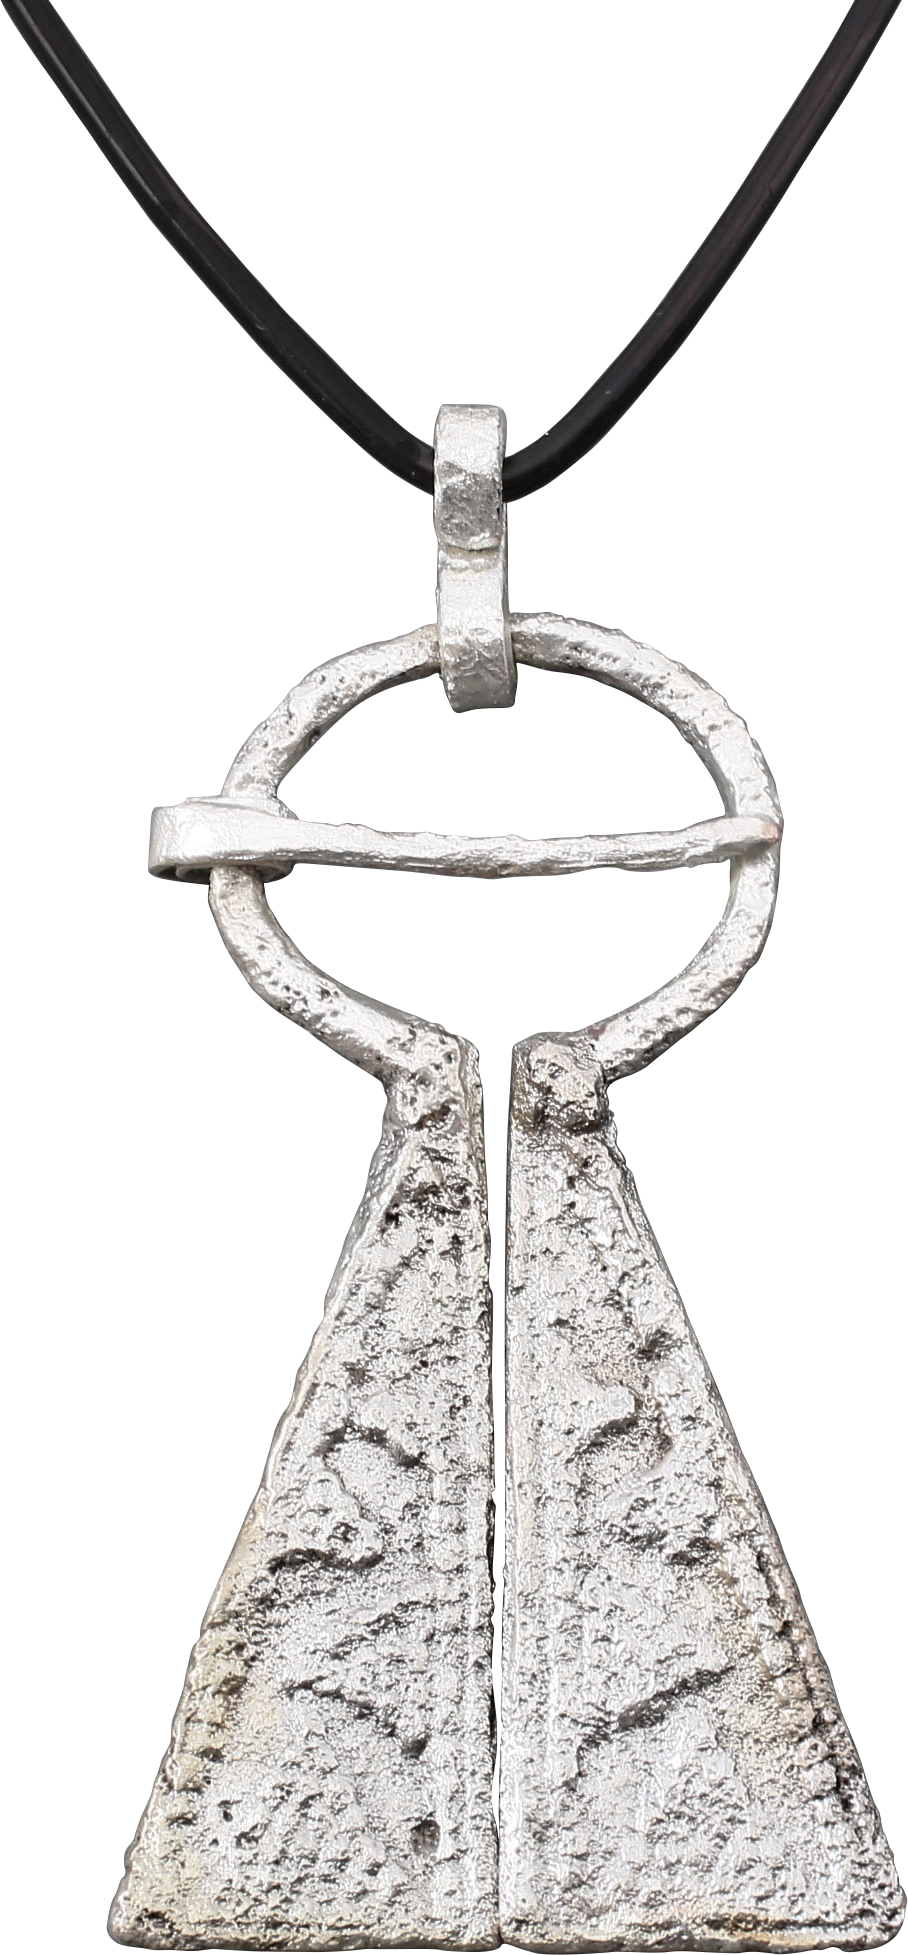 EXCEPTIONAL VIKING PROTECTIVE BROOCH, C.950-1050 AD - Fagan Arms (8202648453294)